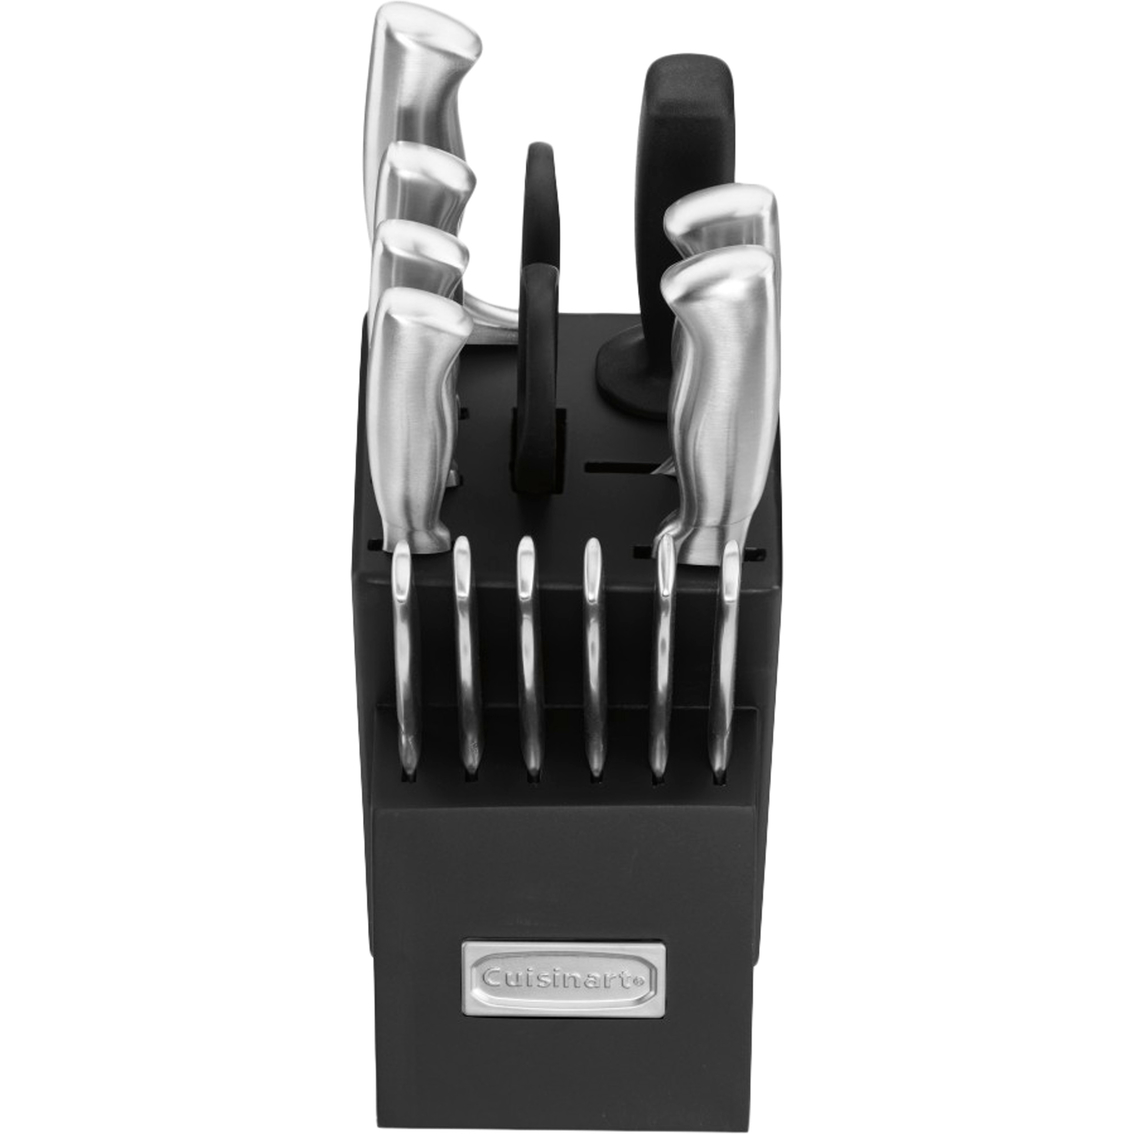 Cuisinart 15-Piece Knife Set with Block, High Carbon Stainless Steel